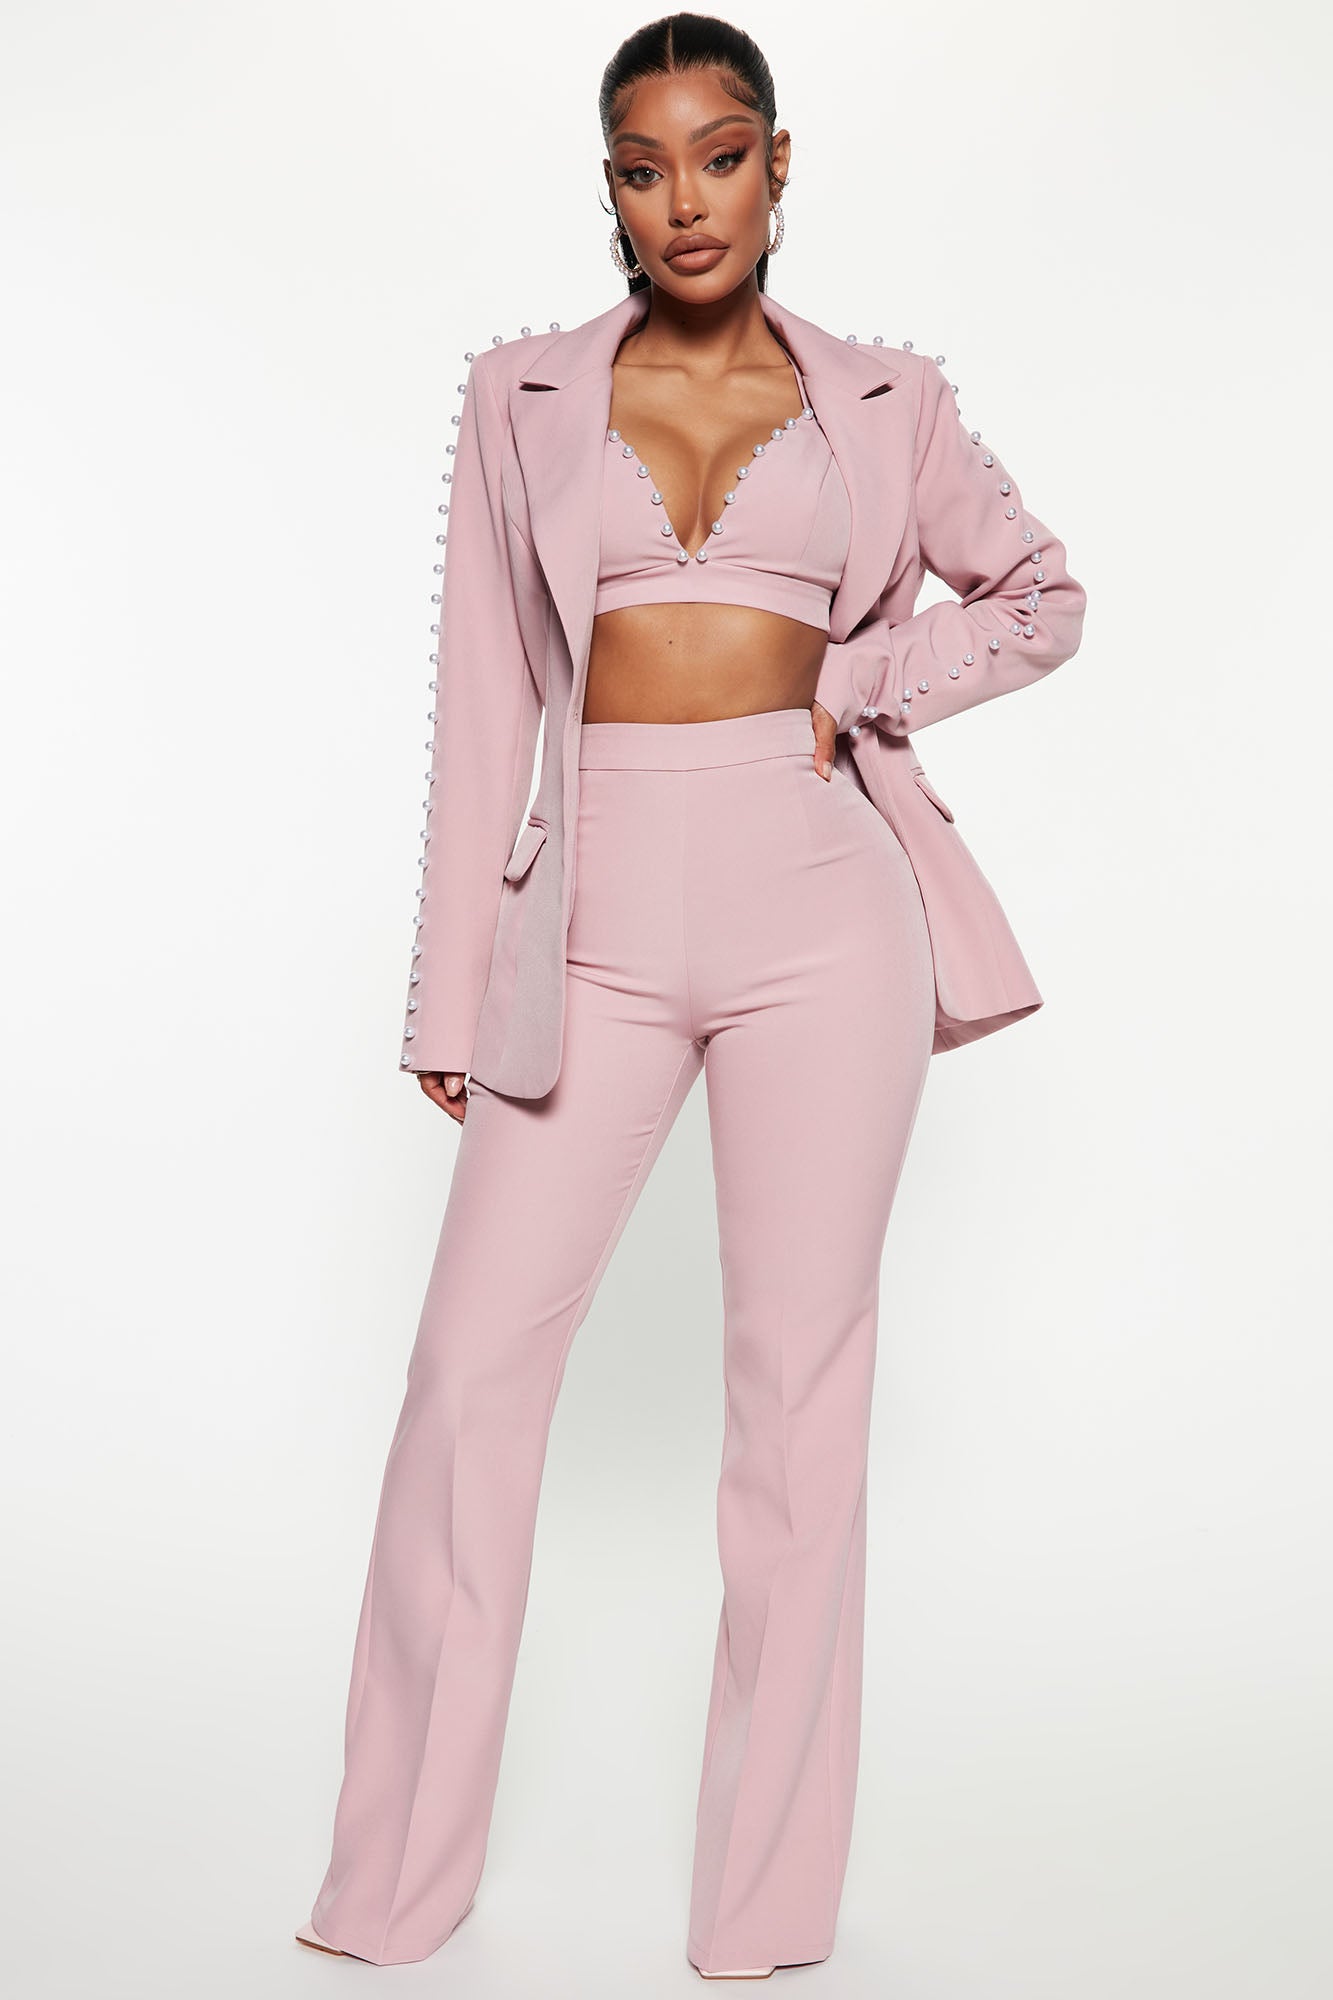 Share more than 197 crop blazer and pants set latest